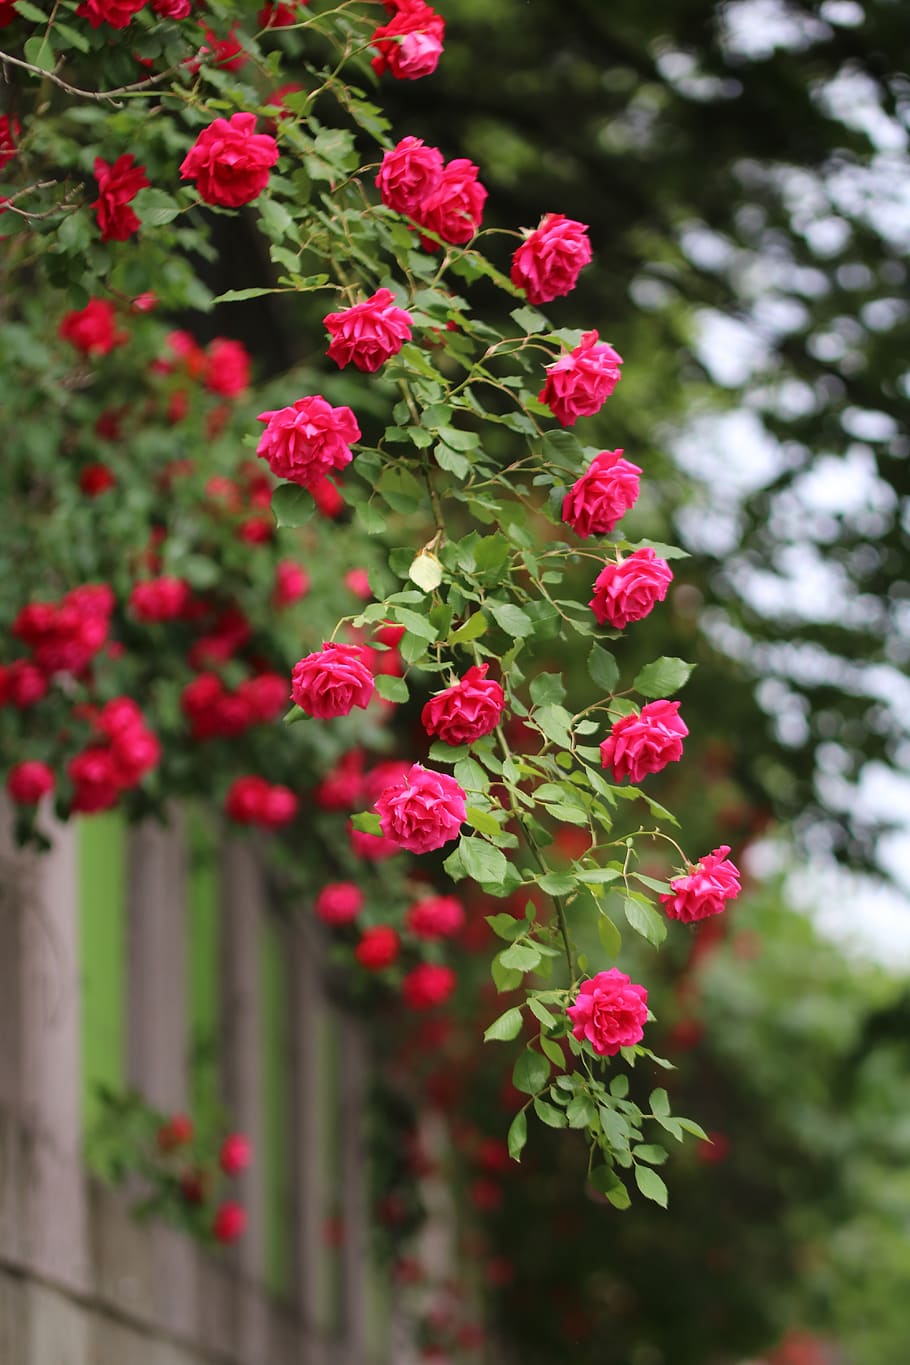 rose, rose vines, nature, plants, beautiful, red roses, fence, HD wallpaper